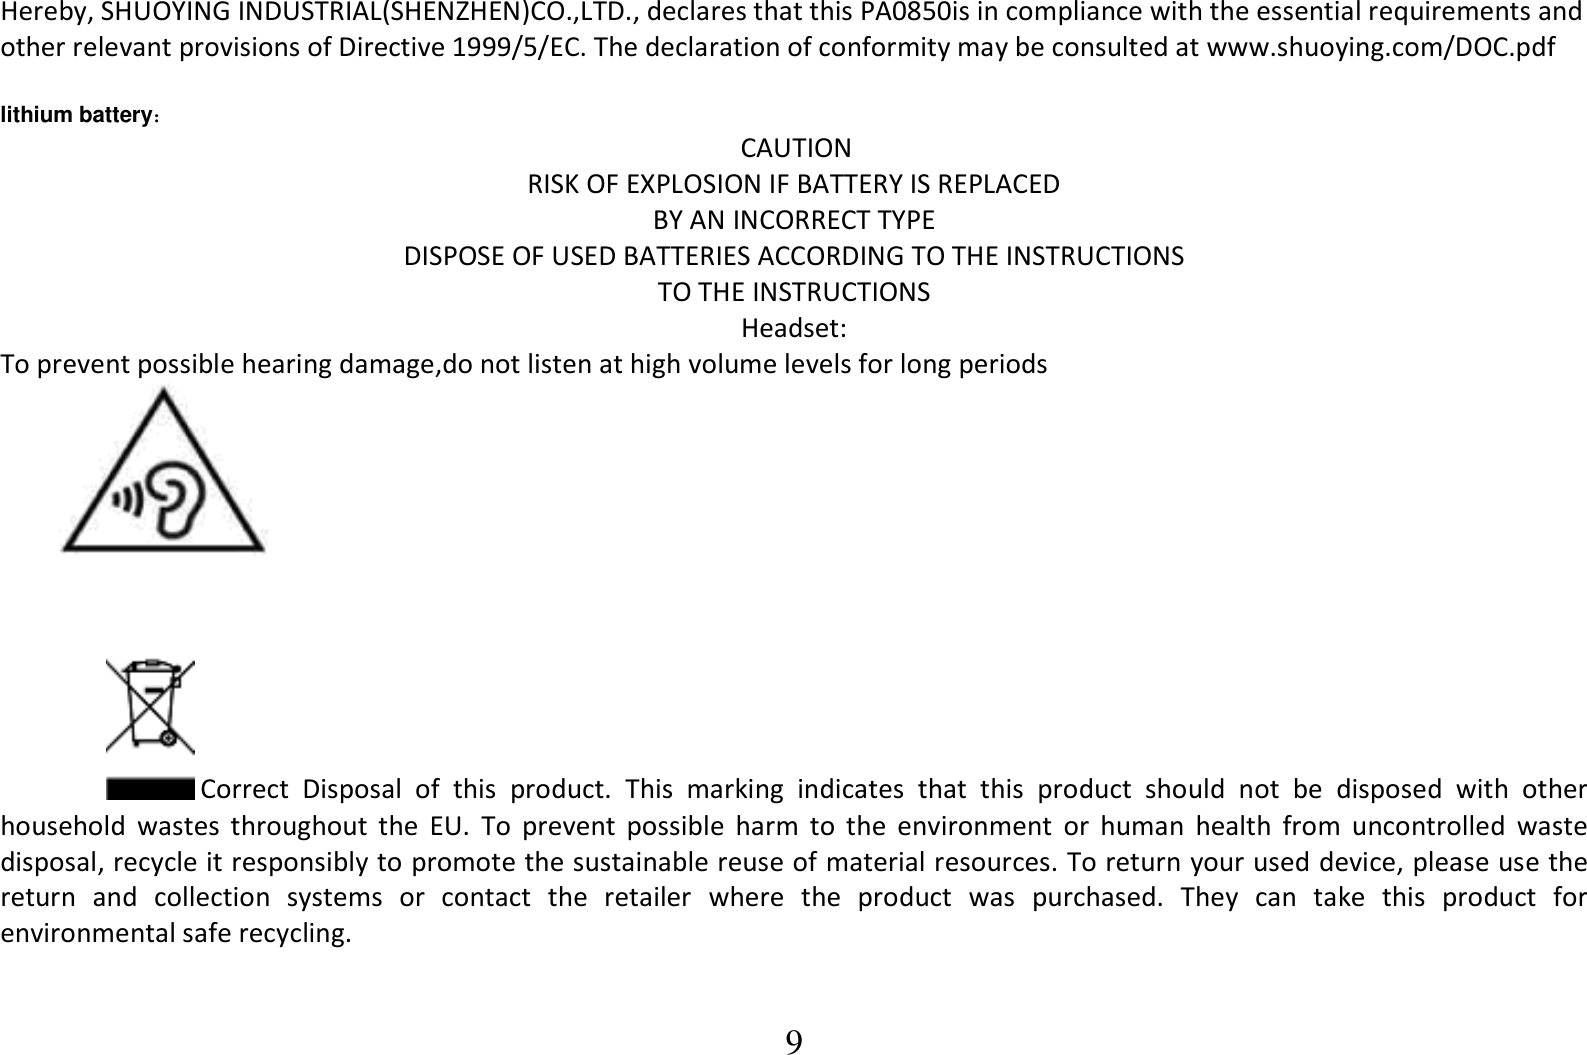  9 Hereby, SHUOYING INDUSTRIAL(SHENZHEN)CO.,LTD., declares that this PA0850is in compliance with the essential requirements and other relevant provisions of Directive 1999/5/EC. The declaration of conformity may be consulted at www.shuoying.com/DOC.pdf  lithium battery：                                  CAUTION RISK OF EXPLOSION IF BATTERY IS REPLACED  BY AN INCORRECT TYPE DISPOSE OF USED BATTERIES ACCORDING TO THE INSTRUCTIONS TO THE INSTRUCTIONS Headset: To prevent possible hearing damage,do not listen at high volume levels for long periods           Correct  Disposal  of  this  product.  This  marking  indicates  that  this  product  should  not  be  disposed  with  other household  wastes  throughout  the  EU.  To  prevent  possible  harm  to  the  environment  or  human  health  from  uncontrolled  waste disposal, recycle it responsibly to promote the sustainable reuse of material resources. To return your used device, please use the return  and  collection  systems  or  contact  the  retailer  where  the  product  was  purchased.  They  can  take  this  product  for environmental safe recycling. 